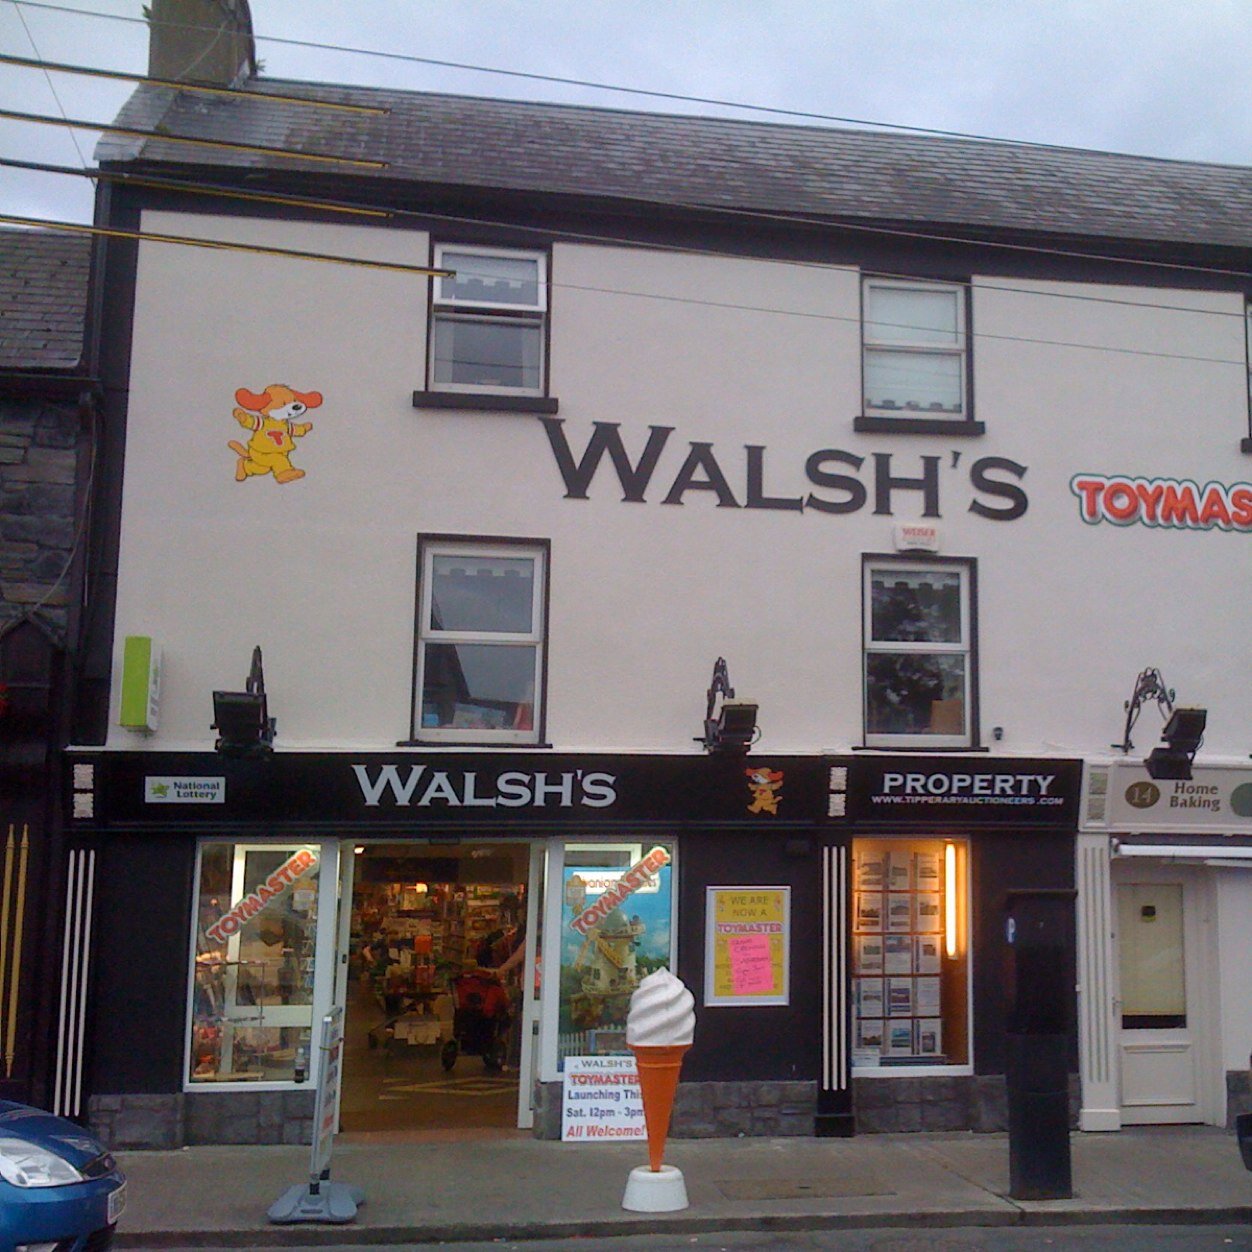 Since 1883 Walsh & Son has been a stockist of all the best Toys & Games. Today we still have all the leading brands at unbeatable prices.